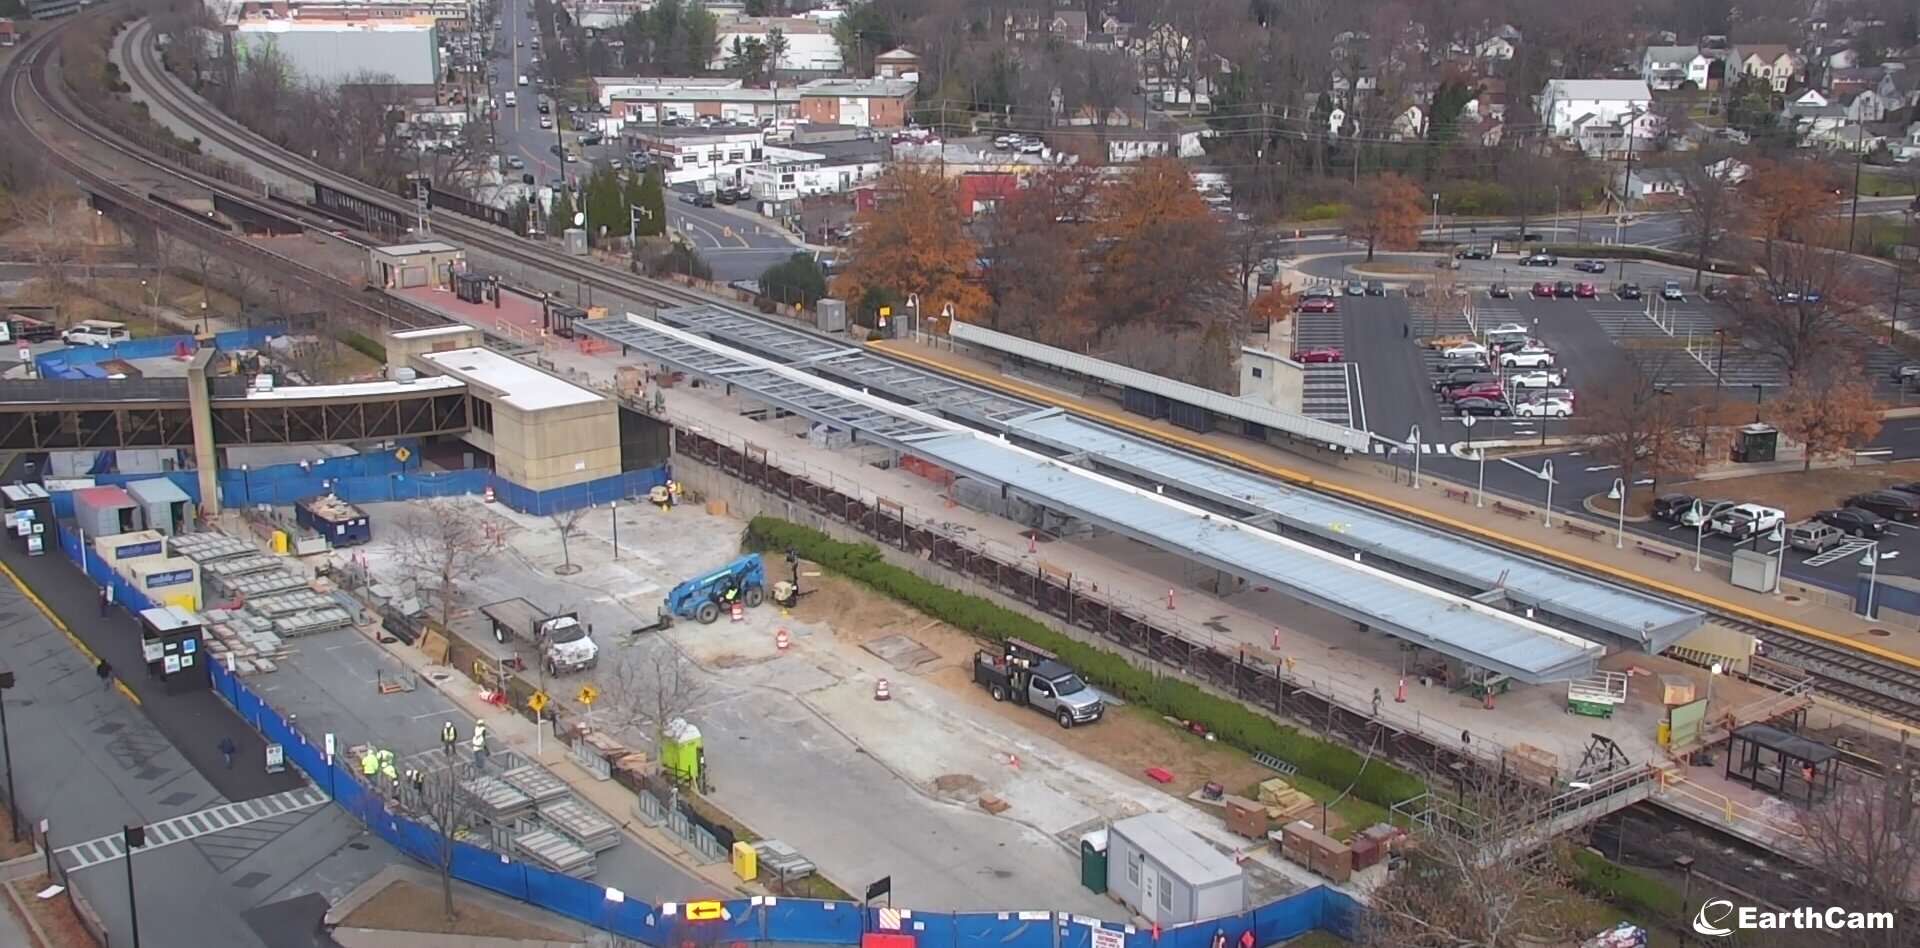 Birds eye view of roof decking installation at Rockville Station